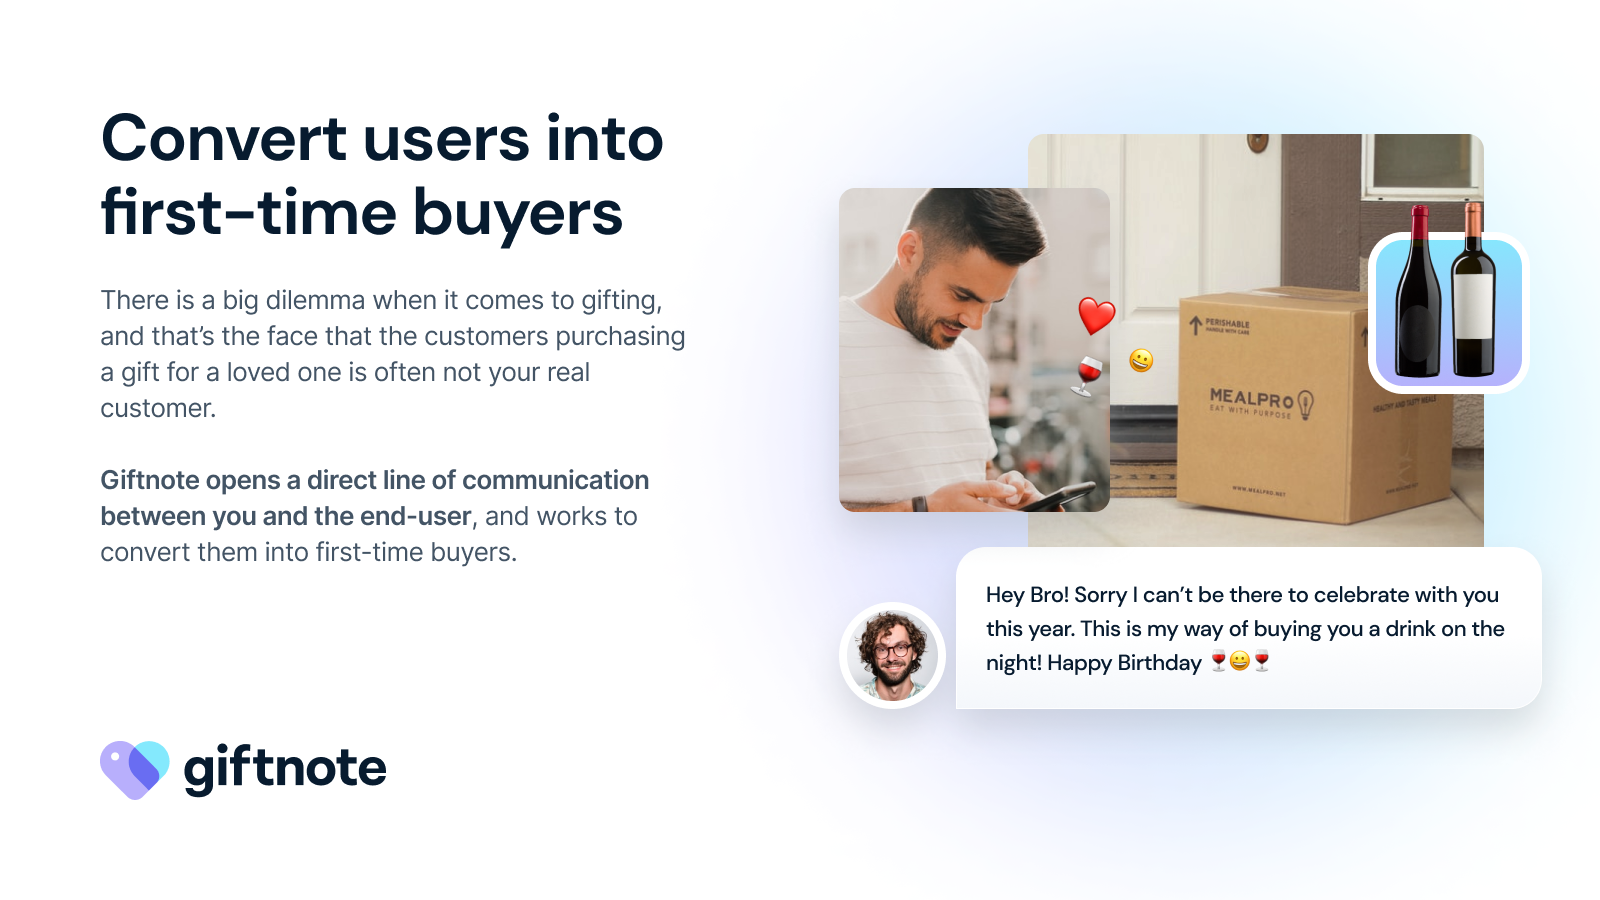 Convert users into first-time buyers